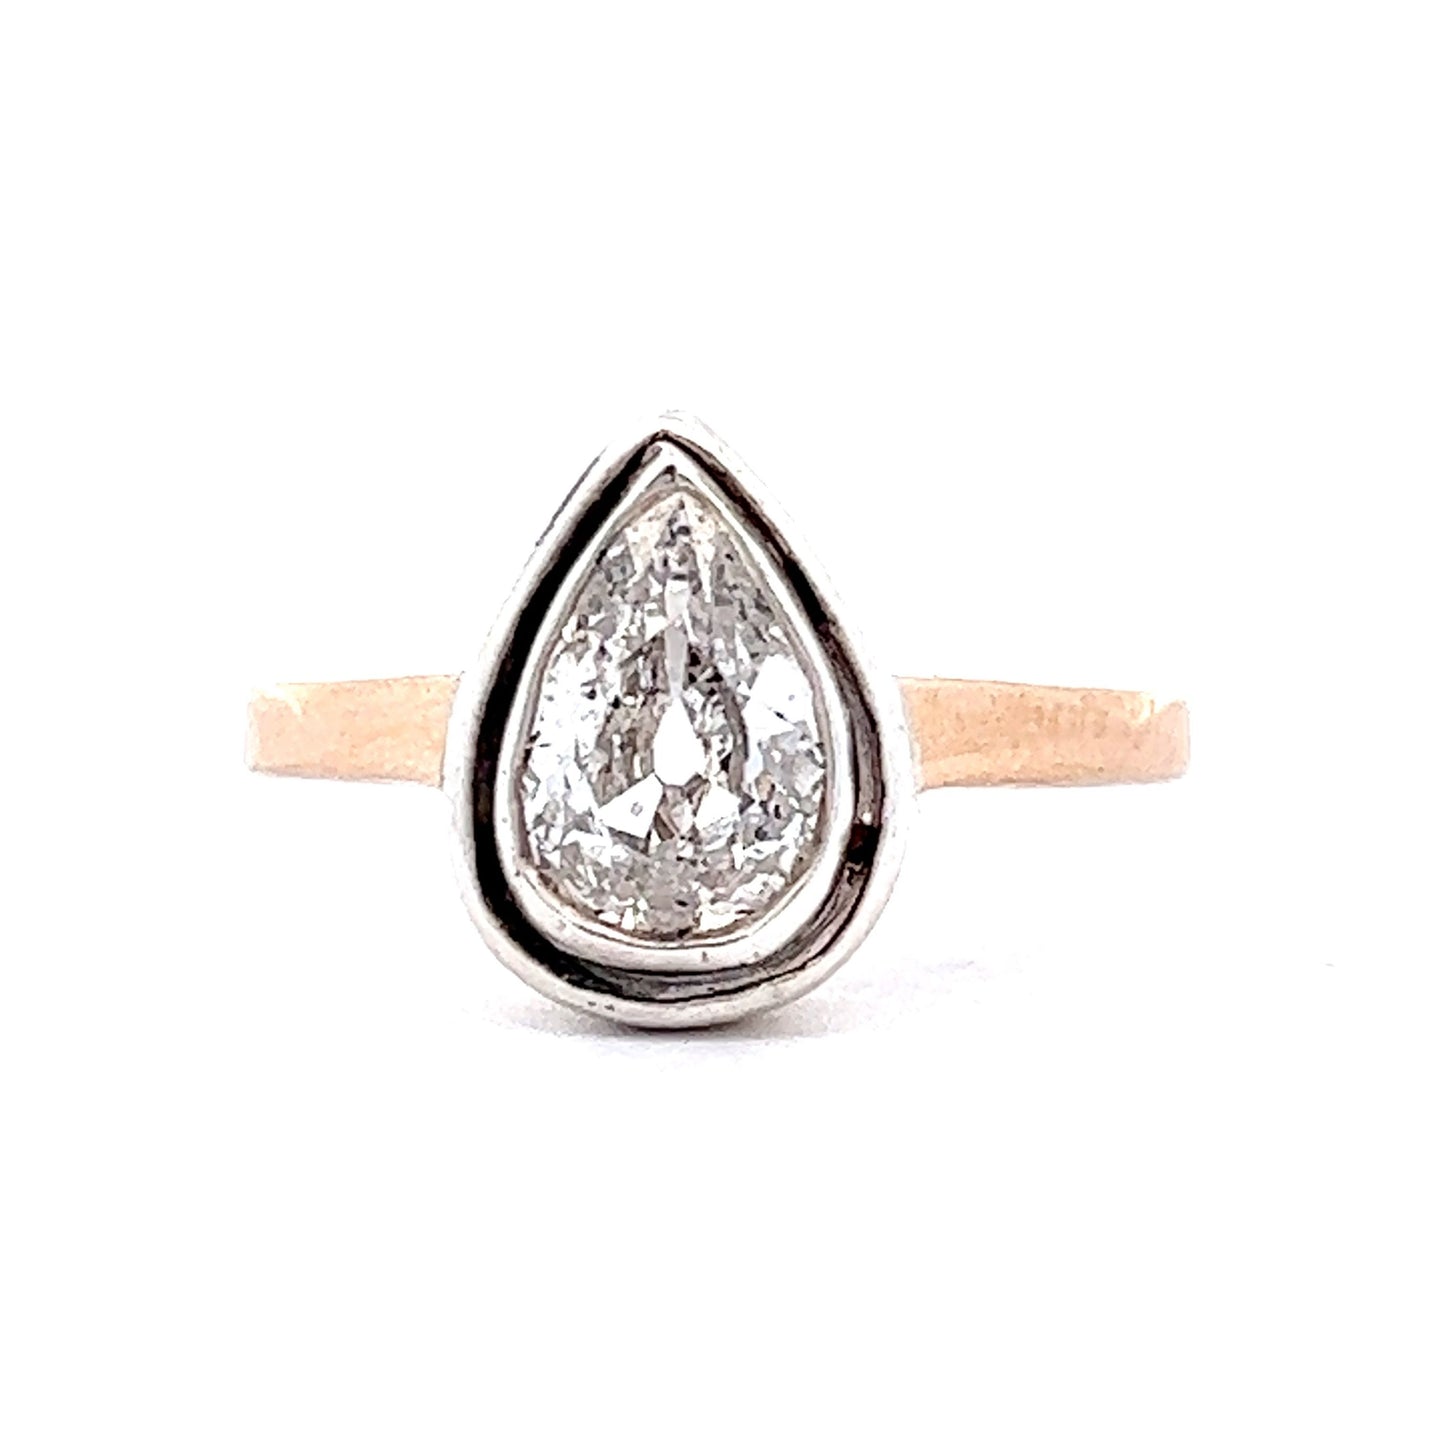 Victorian Pear Cut Diamond Engagement Ring in 14k Rose Gold & Sterling Silver